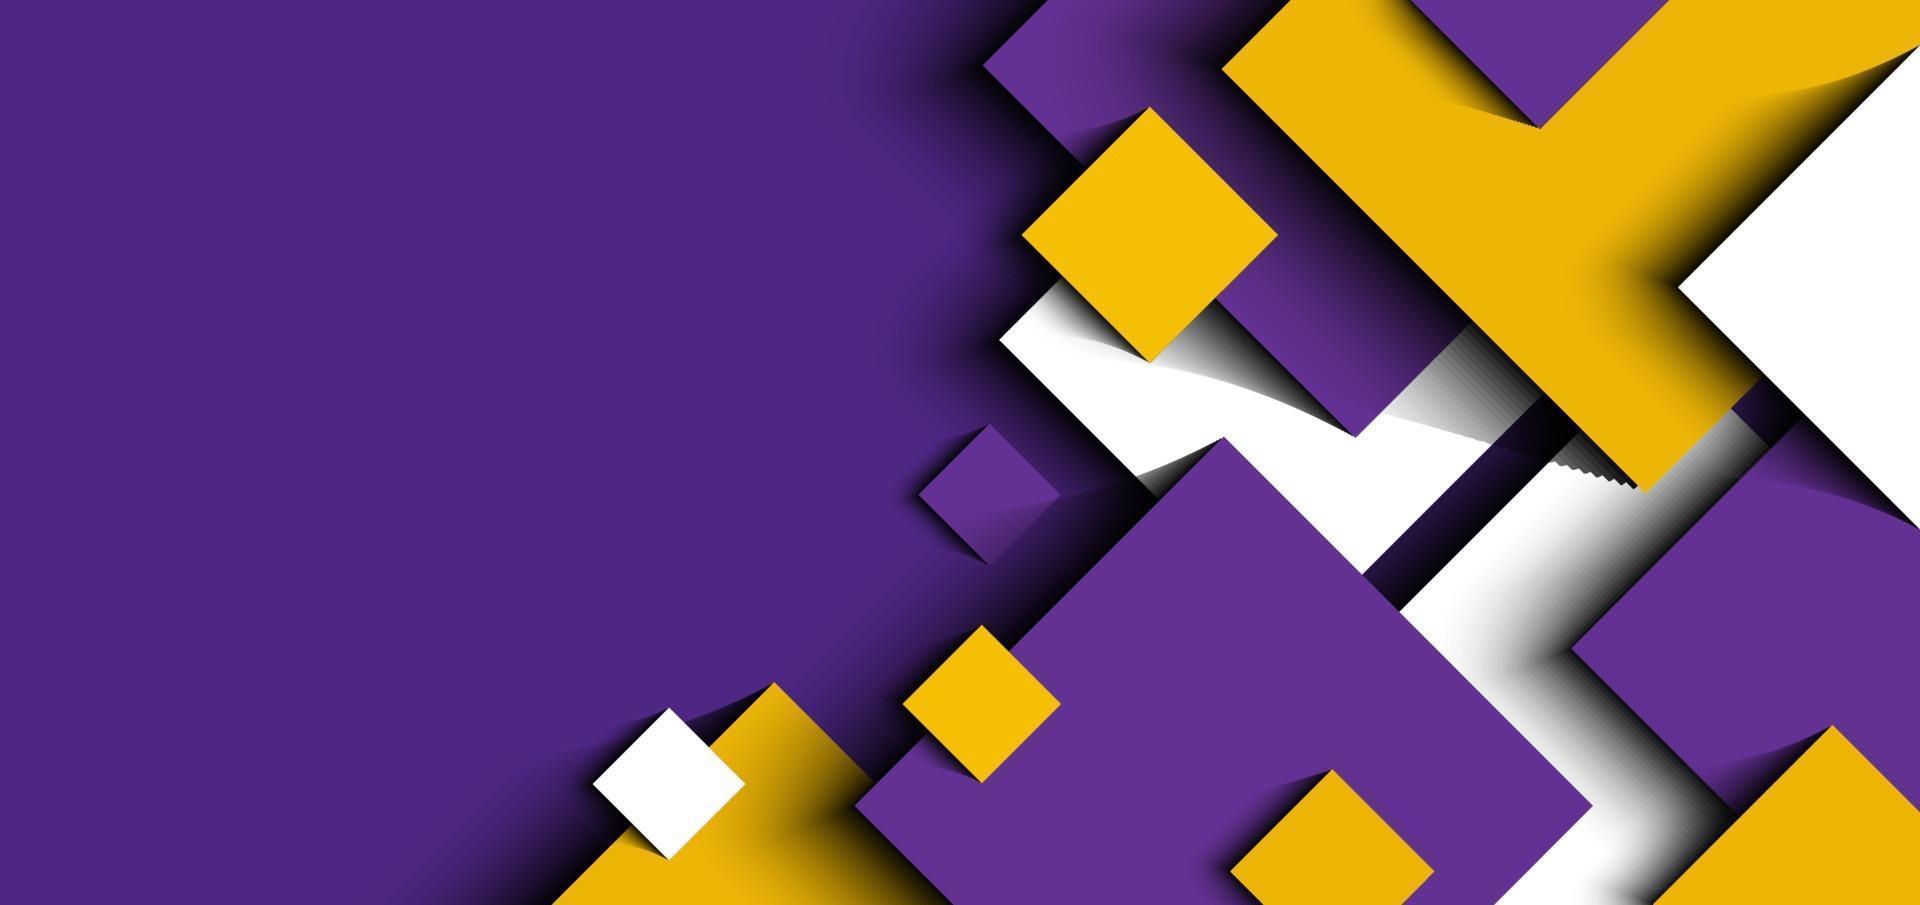 Abstract background 3D purple, yellow, white geometric squares shape design paper cut style vector